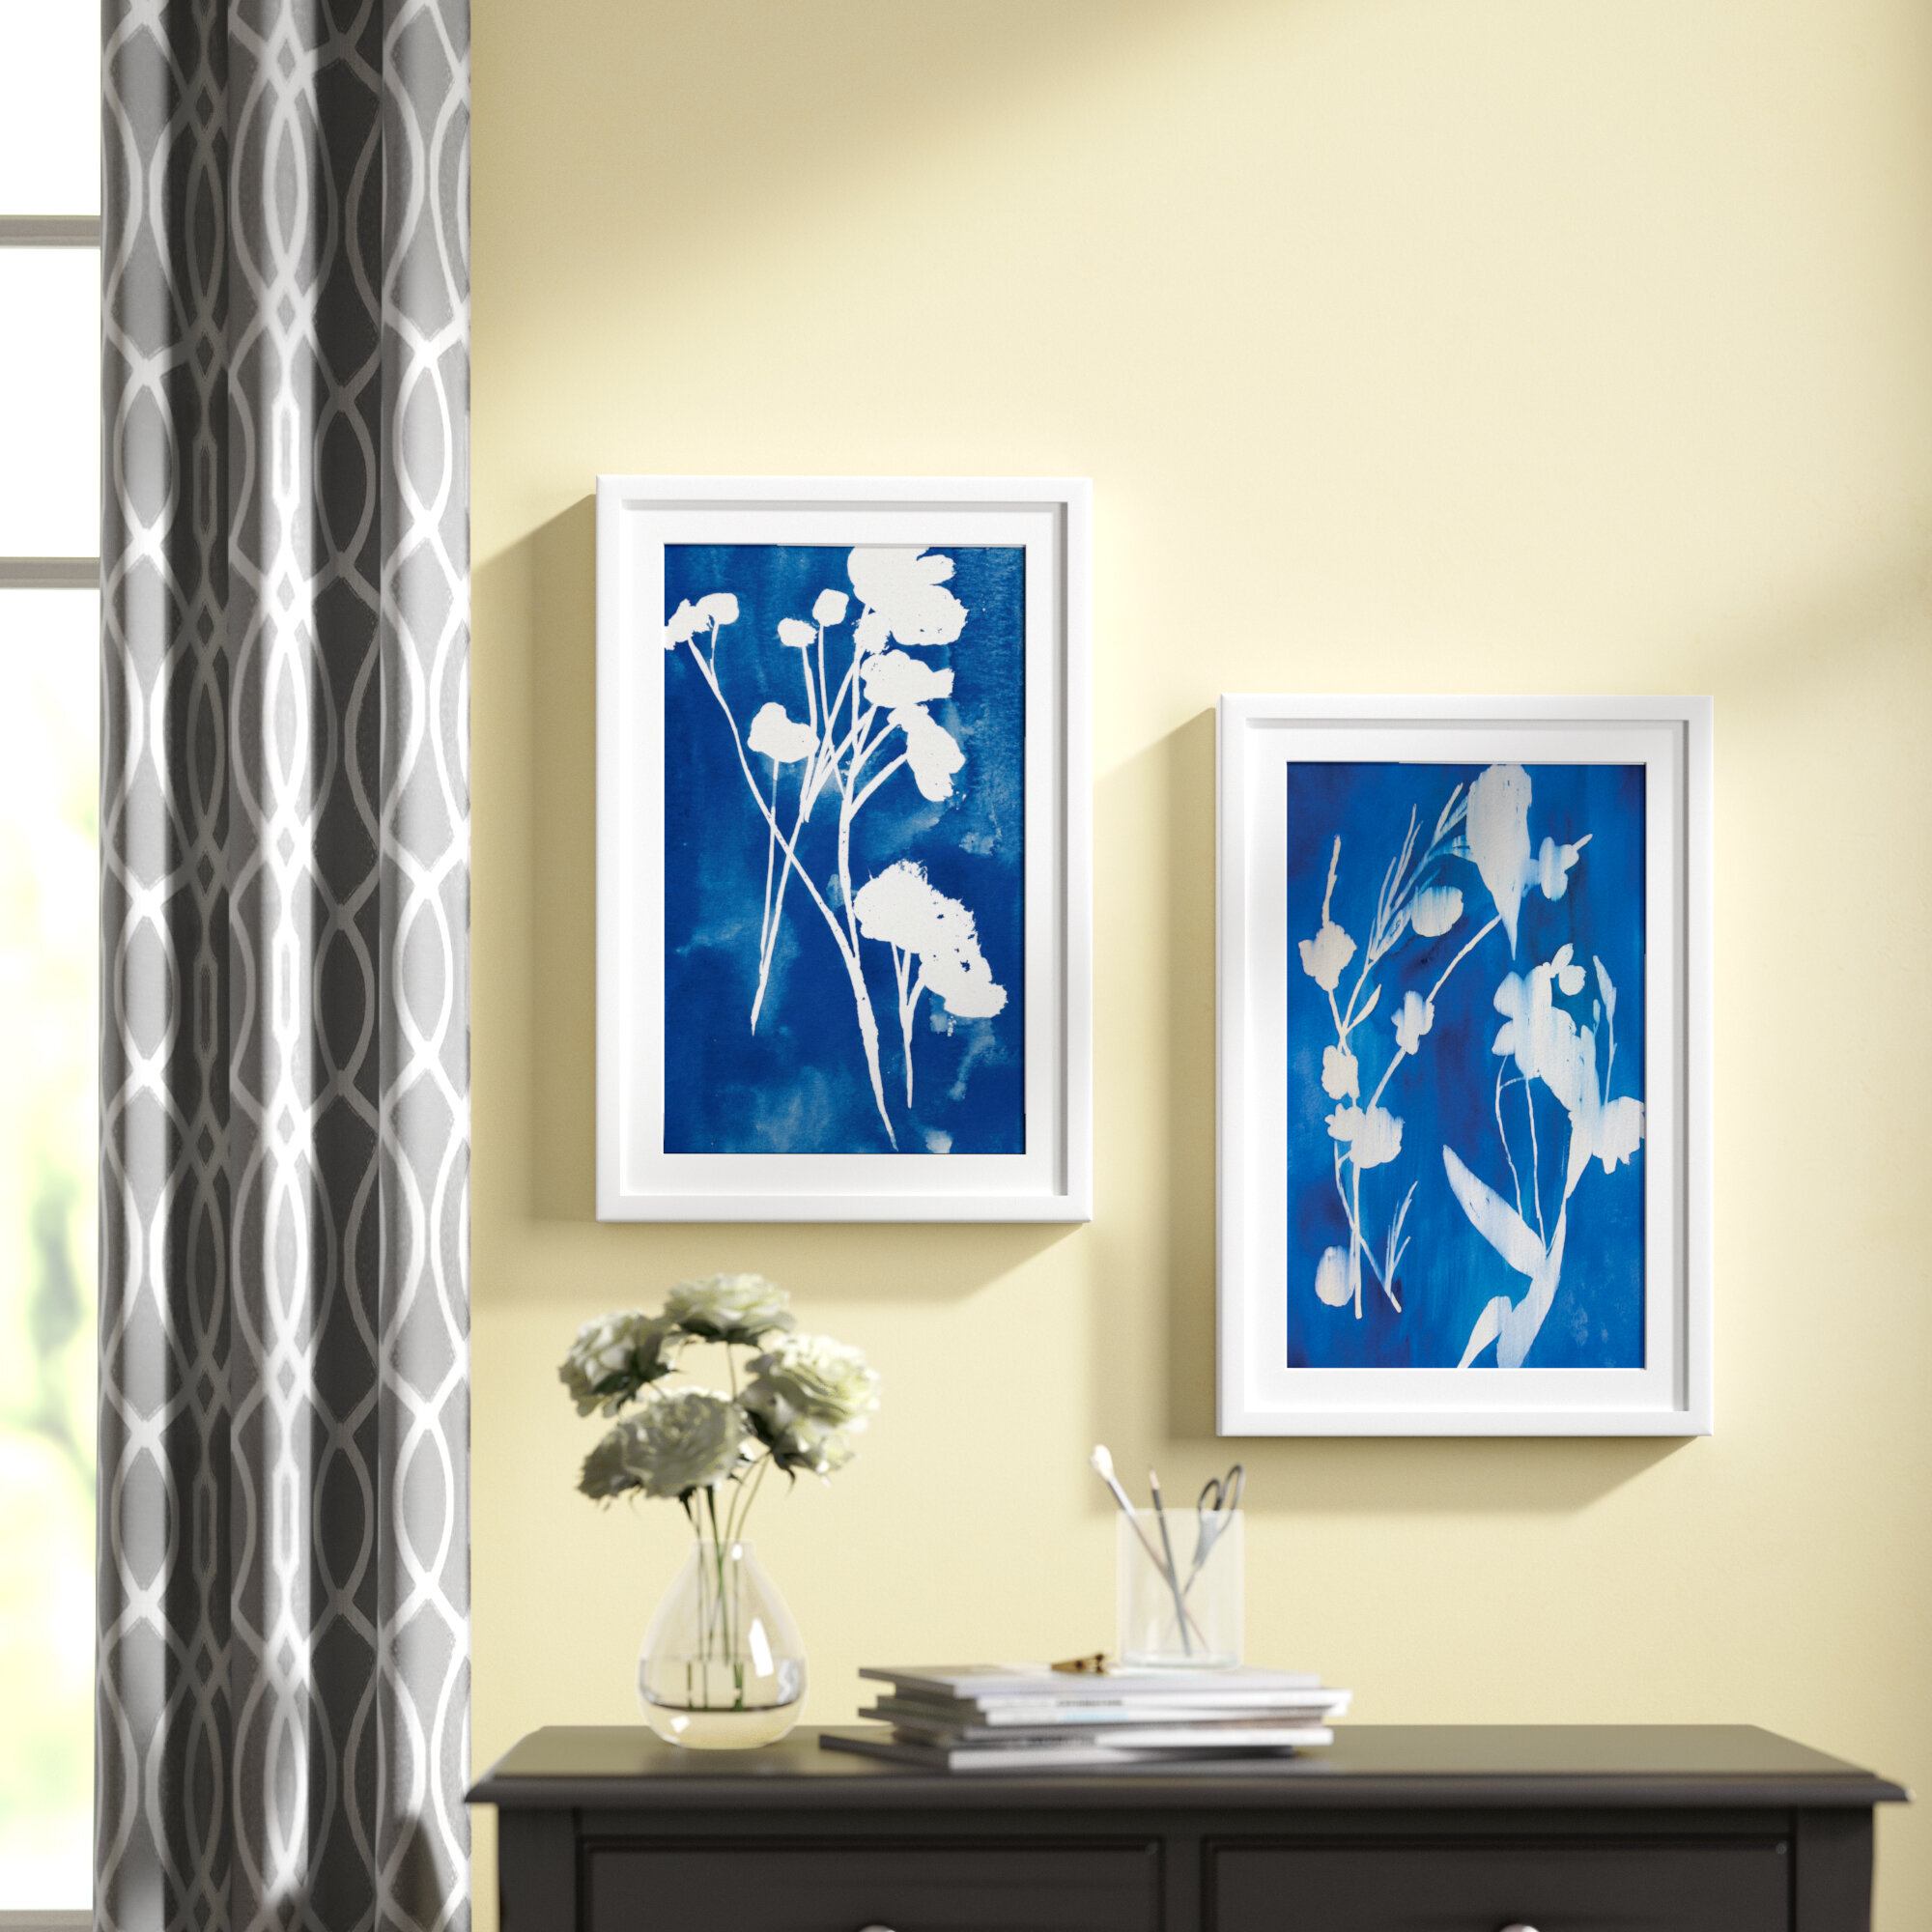 Darby Home Co A Touch Of Royal Blue Diptych 2 Piece Framed Acrylic Painting Print Set Wayfair